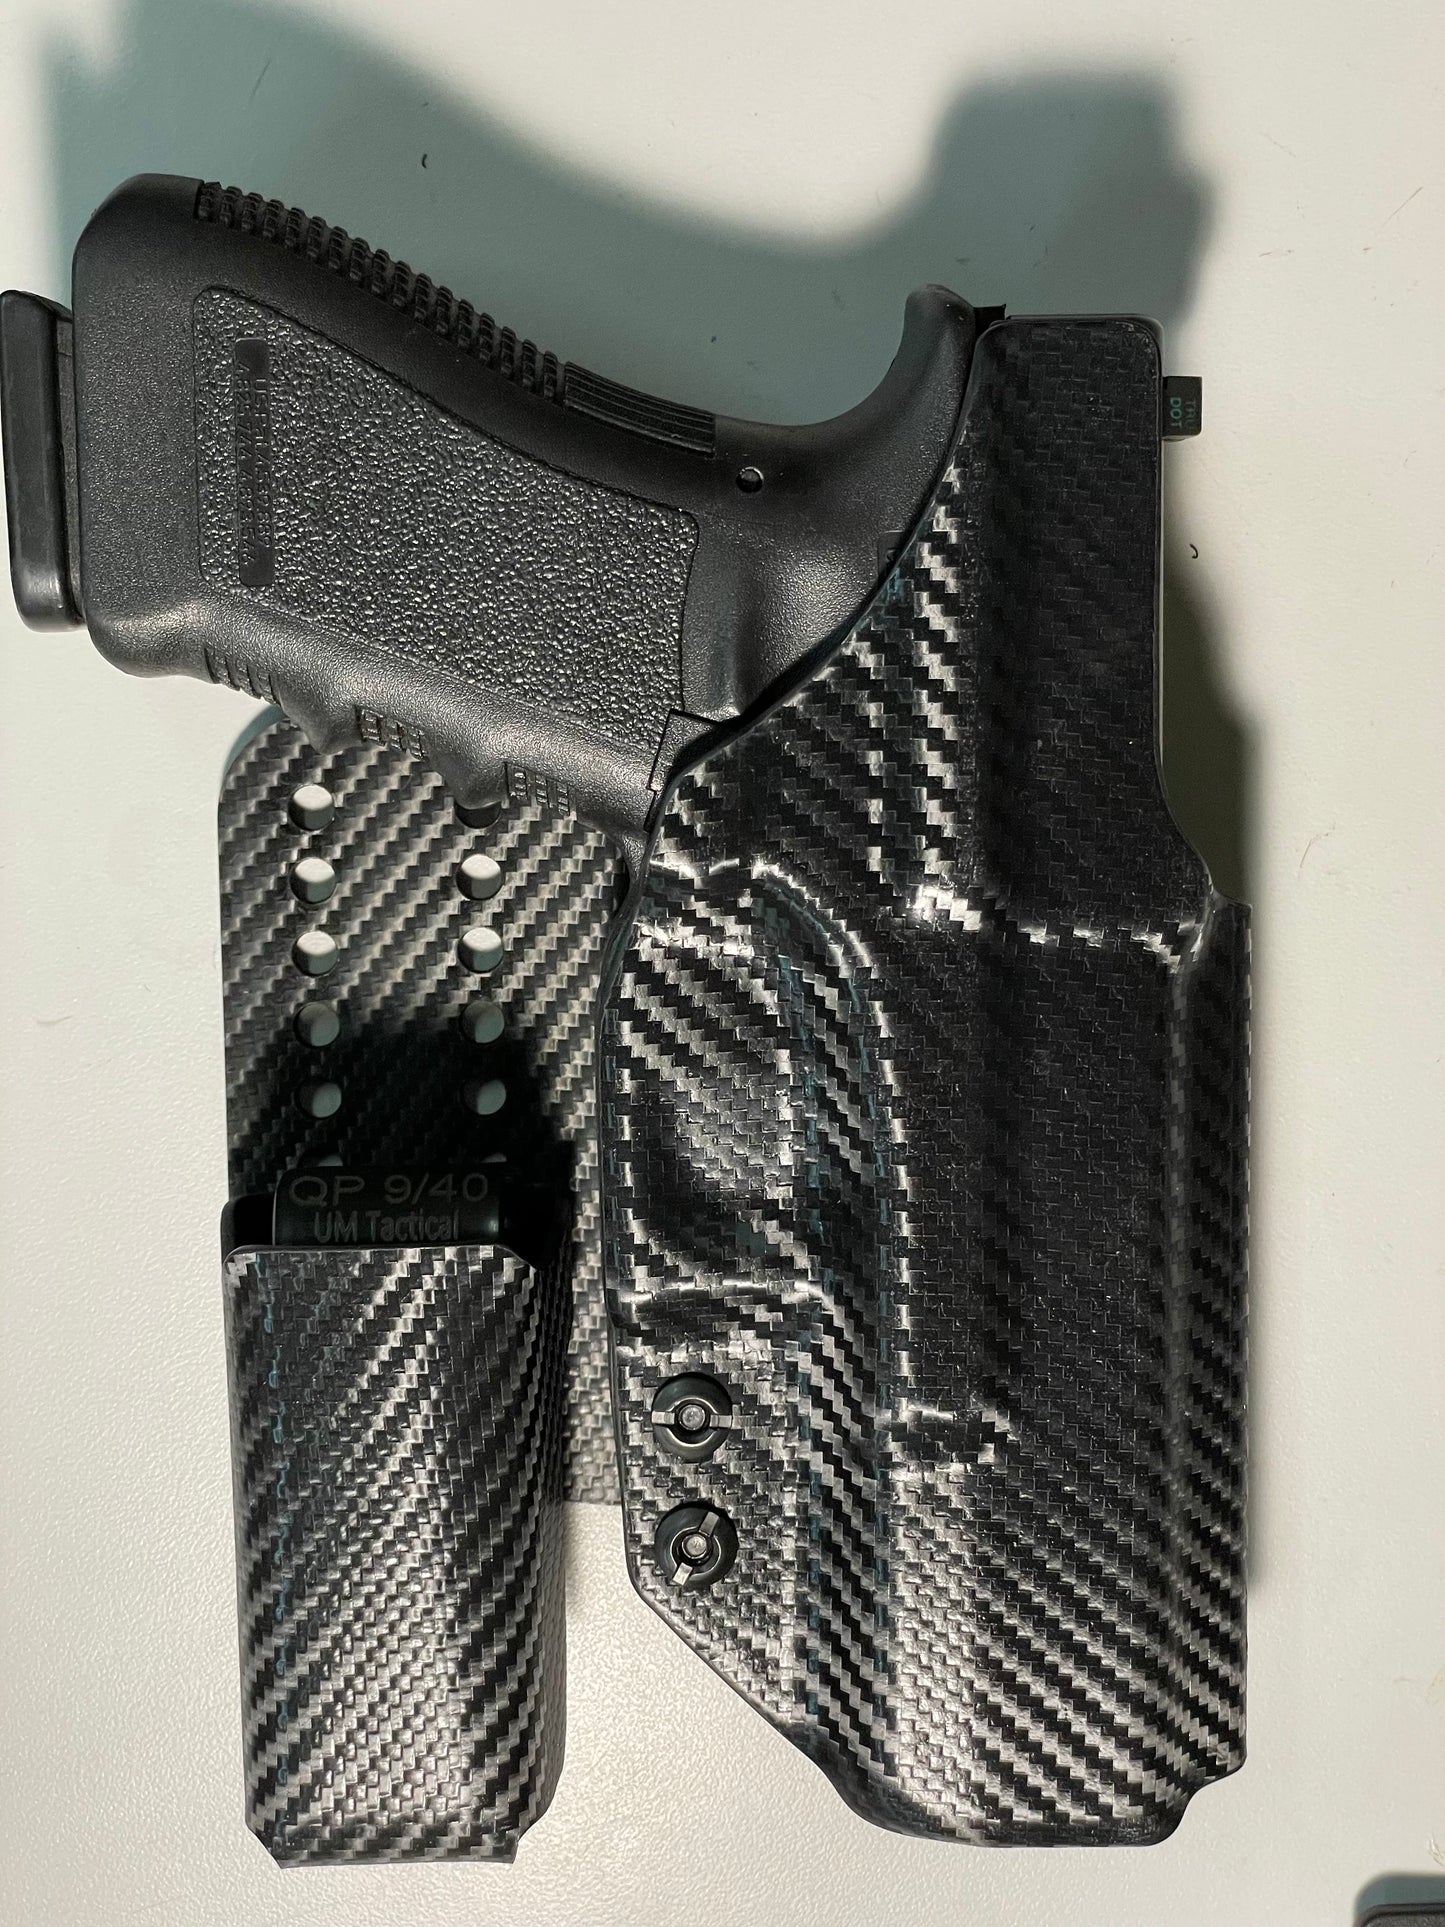 Go One Holster System